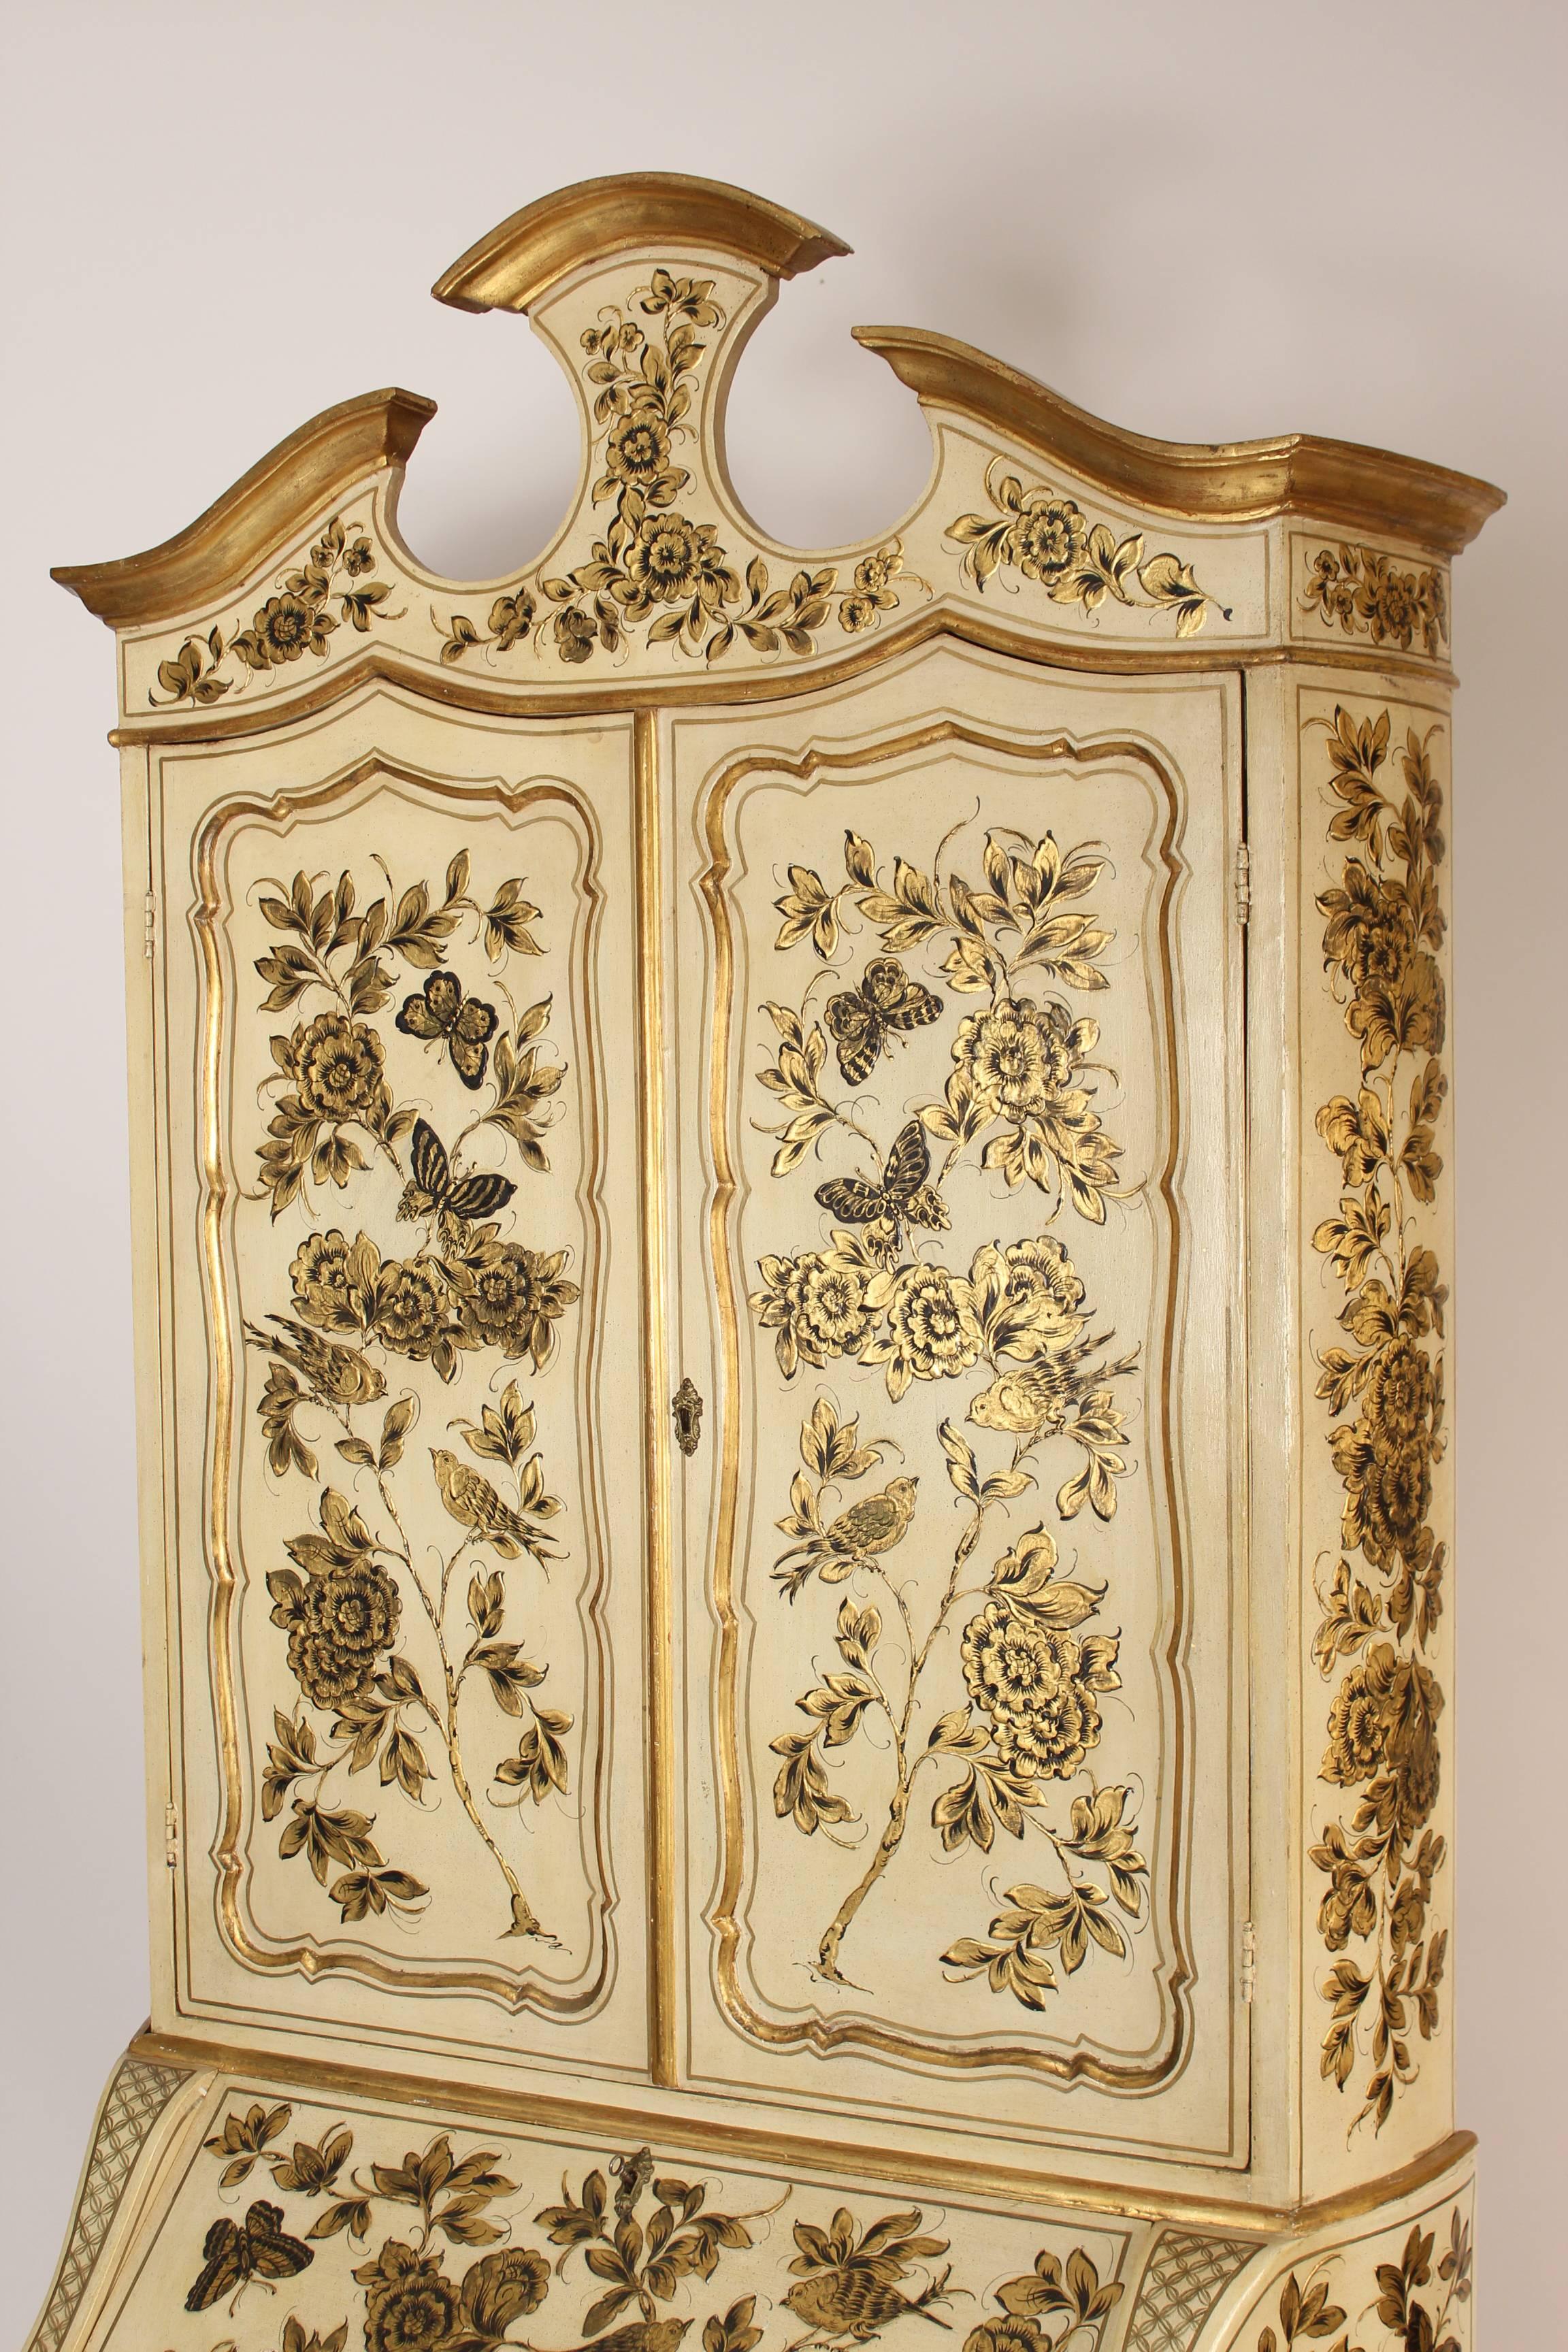 Louis XV Venetian Painted and Gilt Decorated Secretary